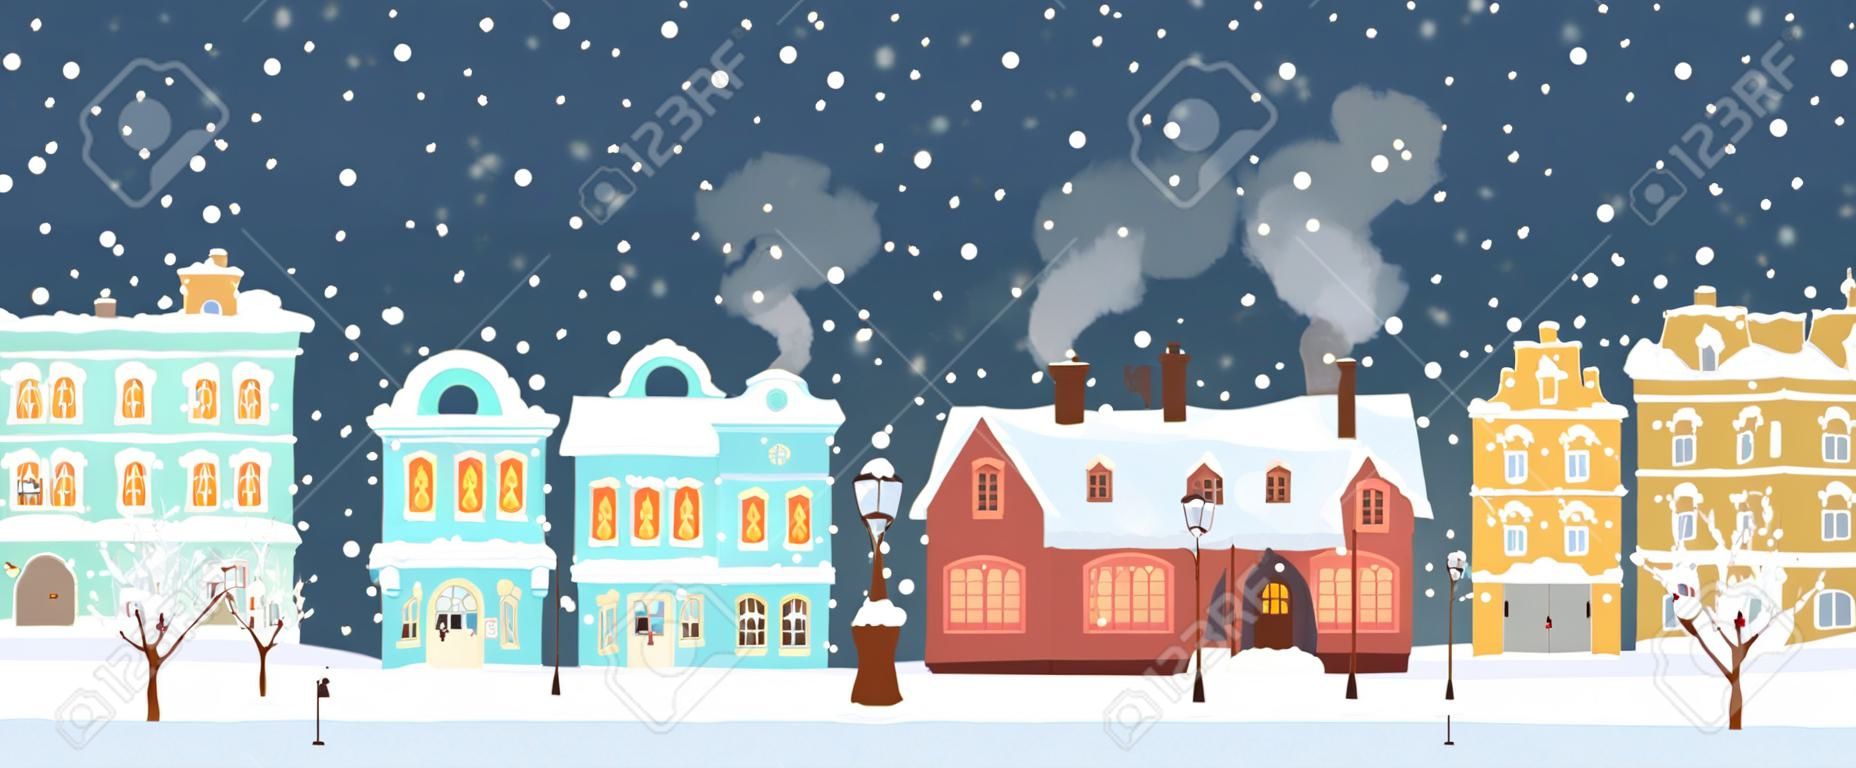 Snowy night in cozy town city panorama. Winter village landscape